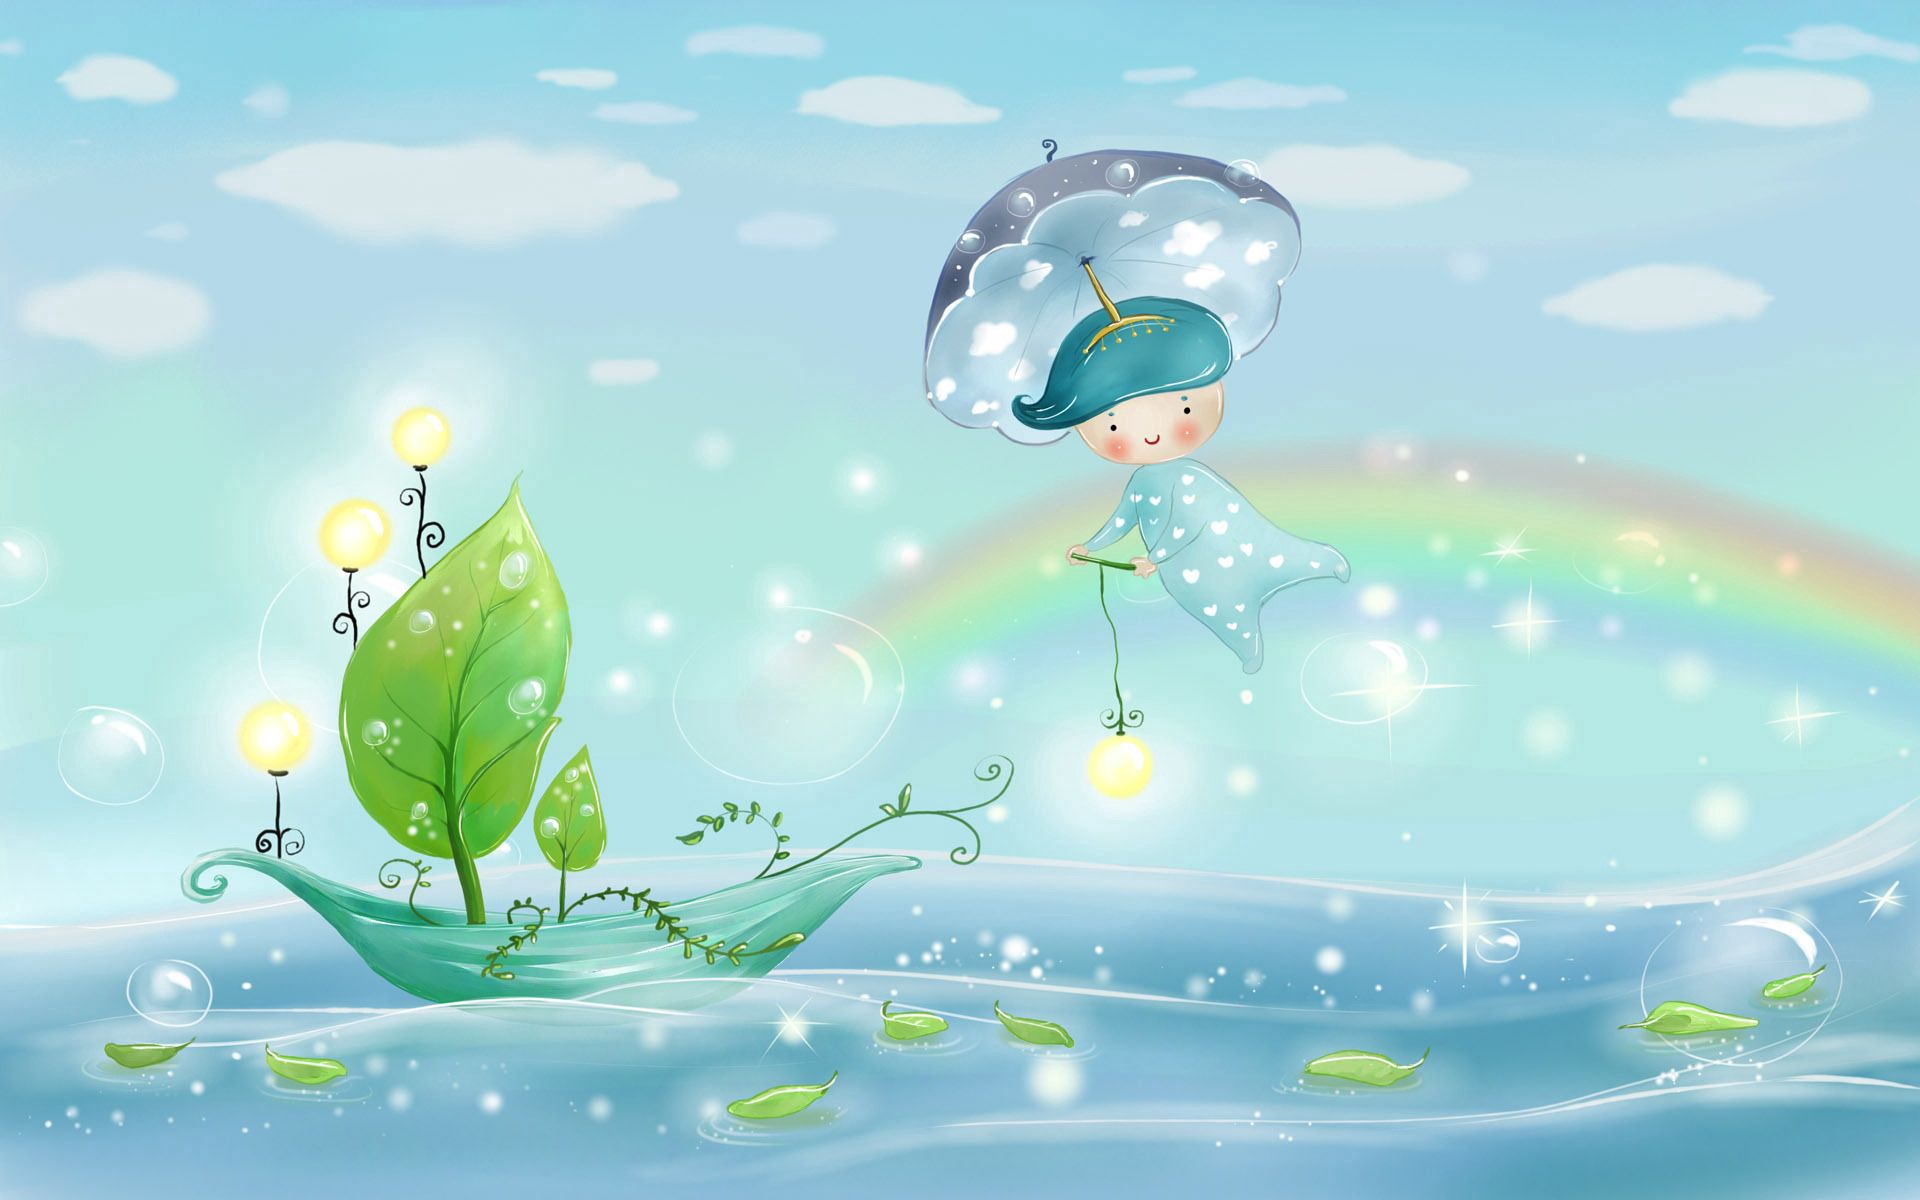 weather, drawing, nature, bubbles, vector, rain, picture, boat, lanterns, water, sky, leaves, sea, clouds, rainbow, lights, shine, light, sail, umbrella, boy